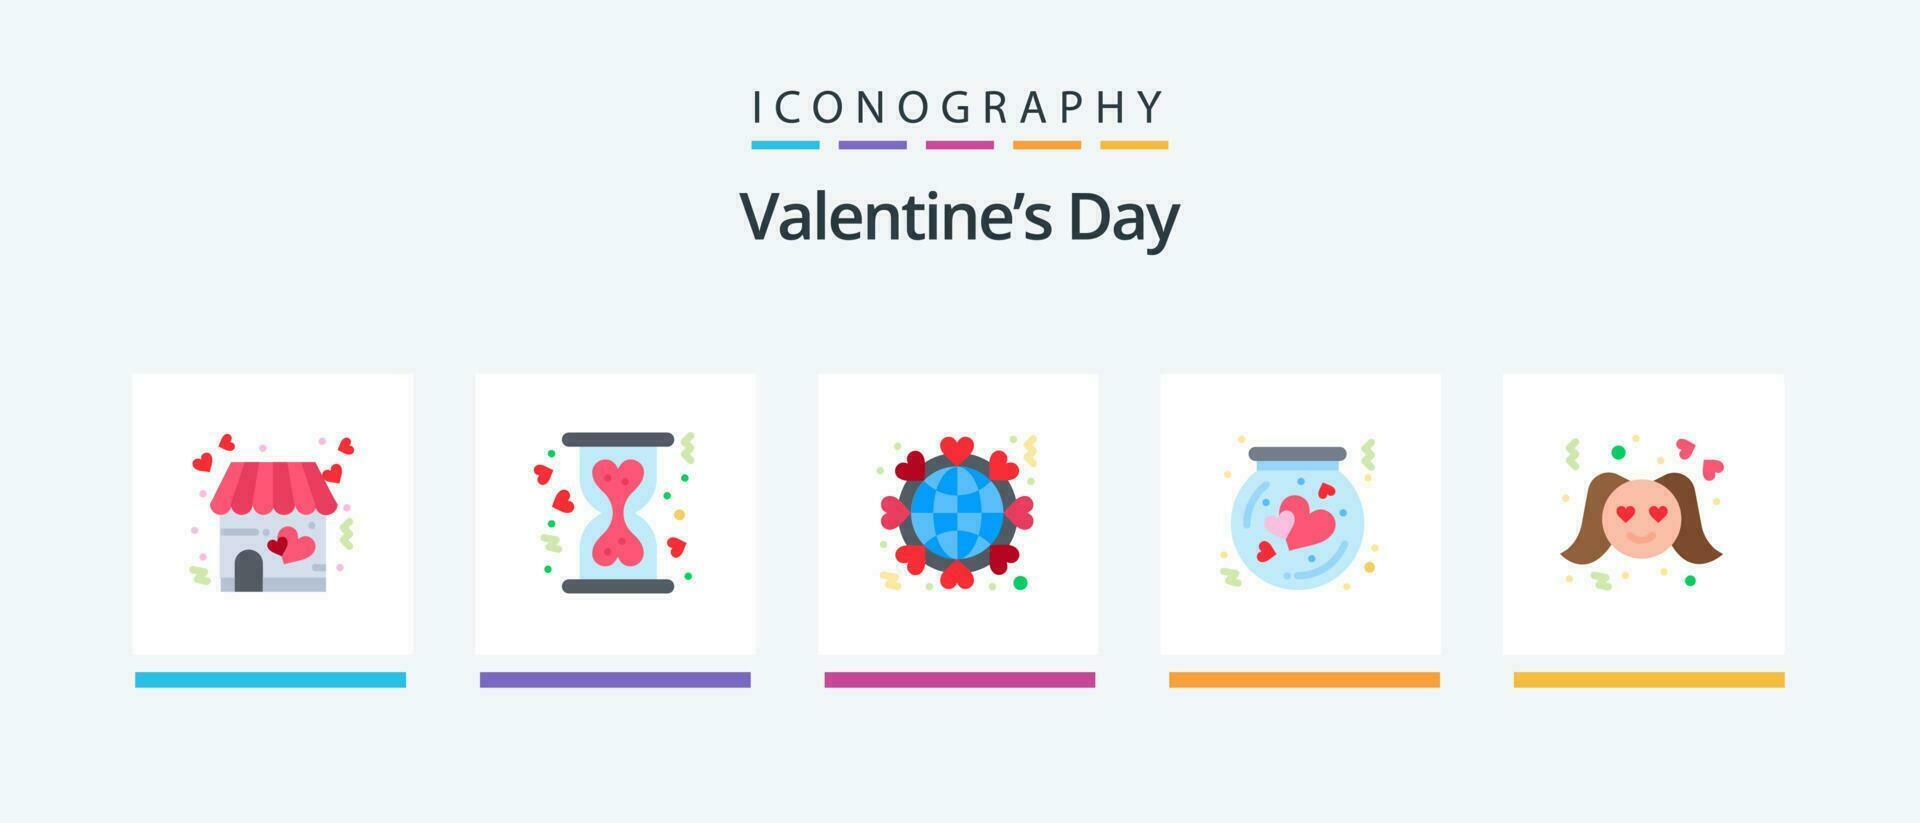 Valentines Day Flat 5 Icon Pack Including thrift-box. heart. globe. flask. world. Creative Icons Design vector